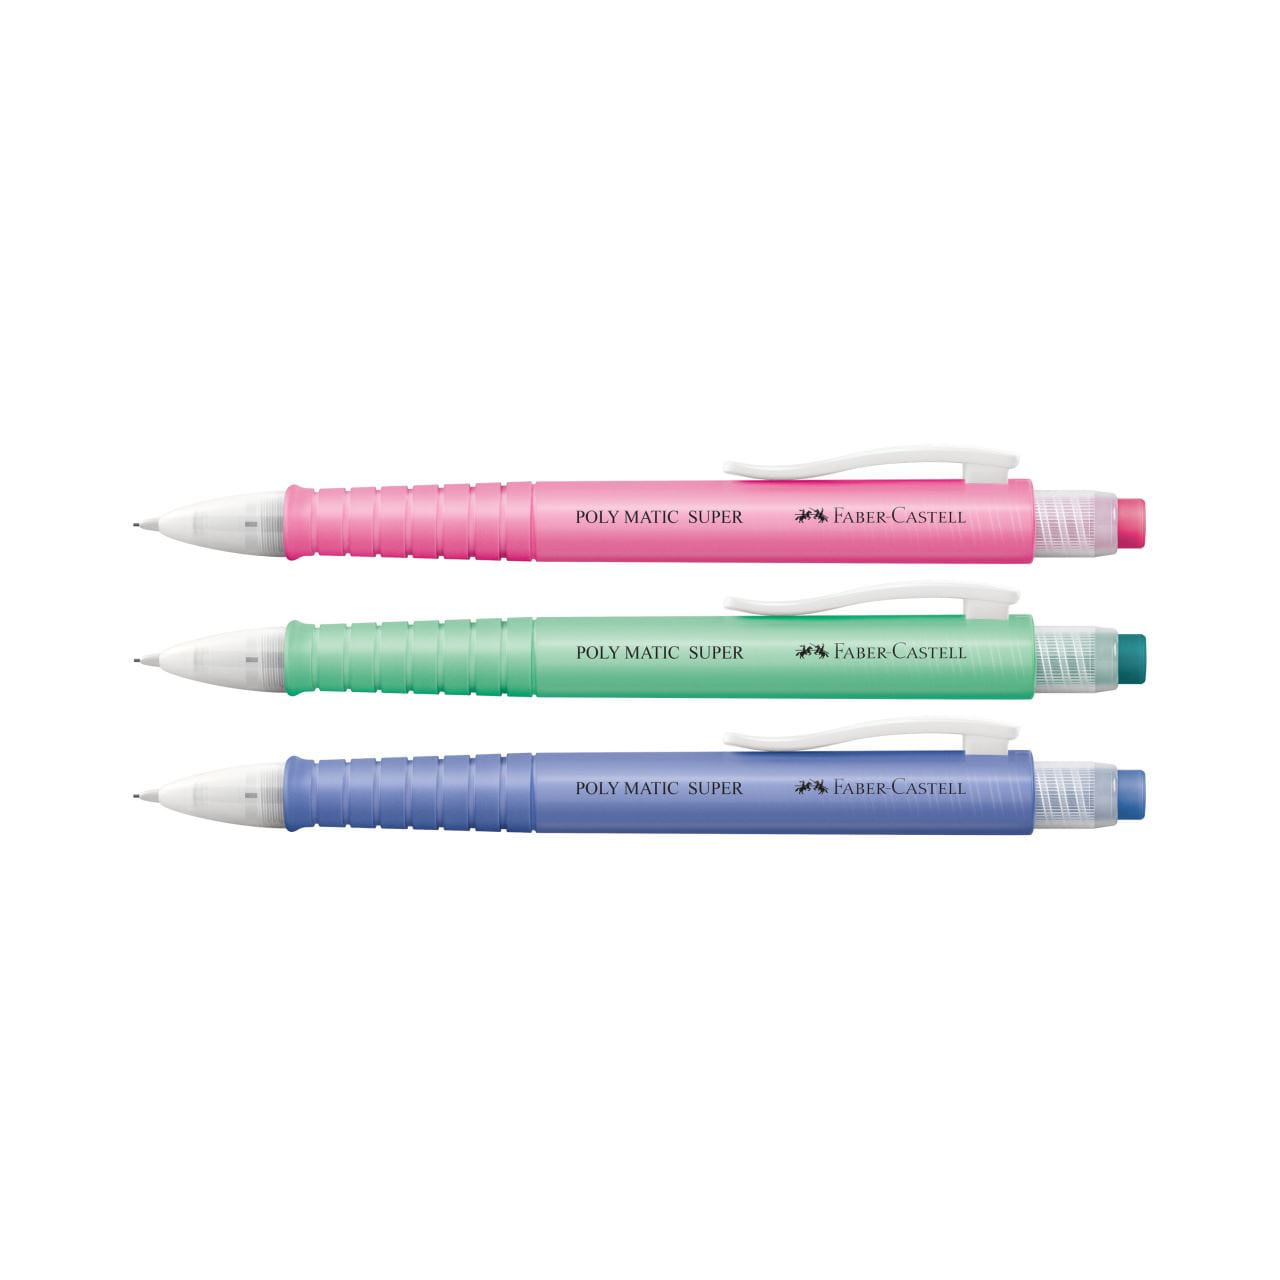 Faber-Castell - Lapiseira Poly Matic Super 0.5mm Colors